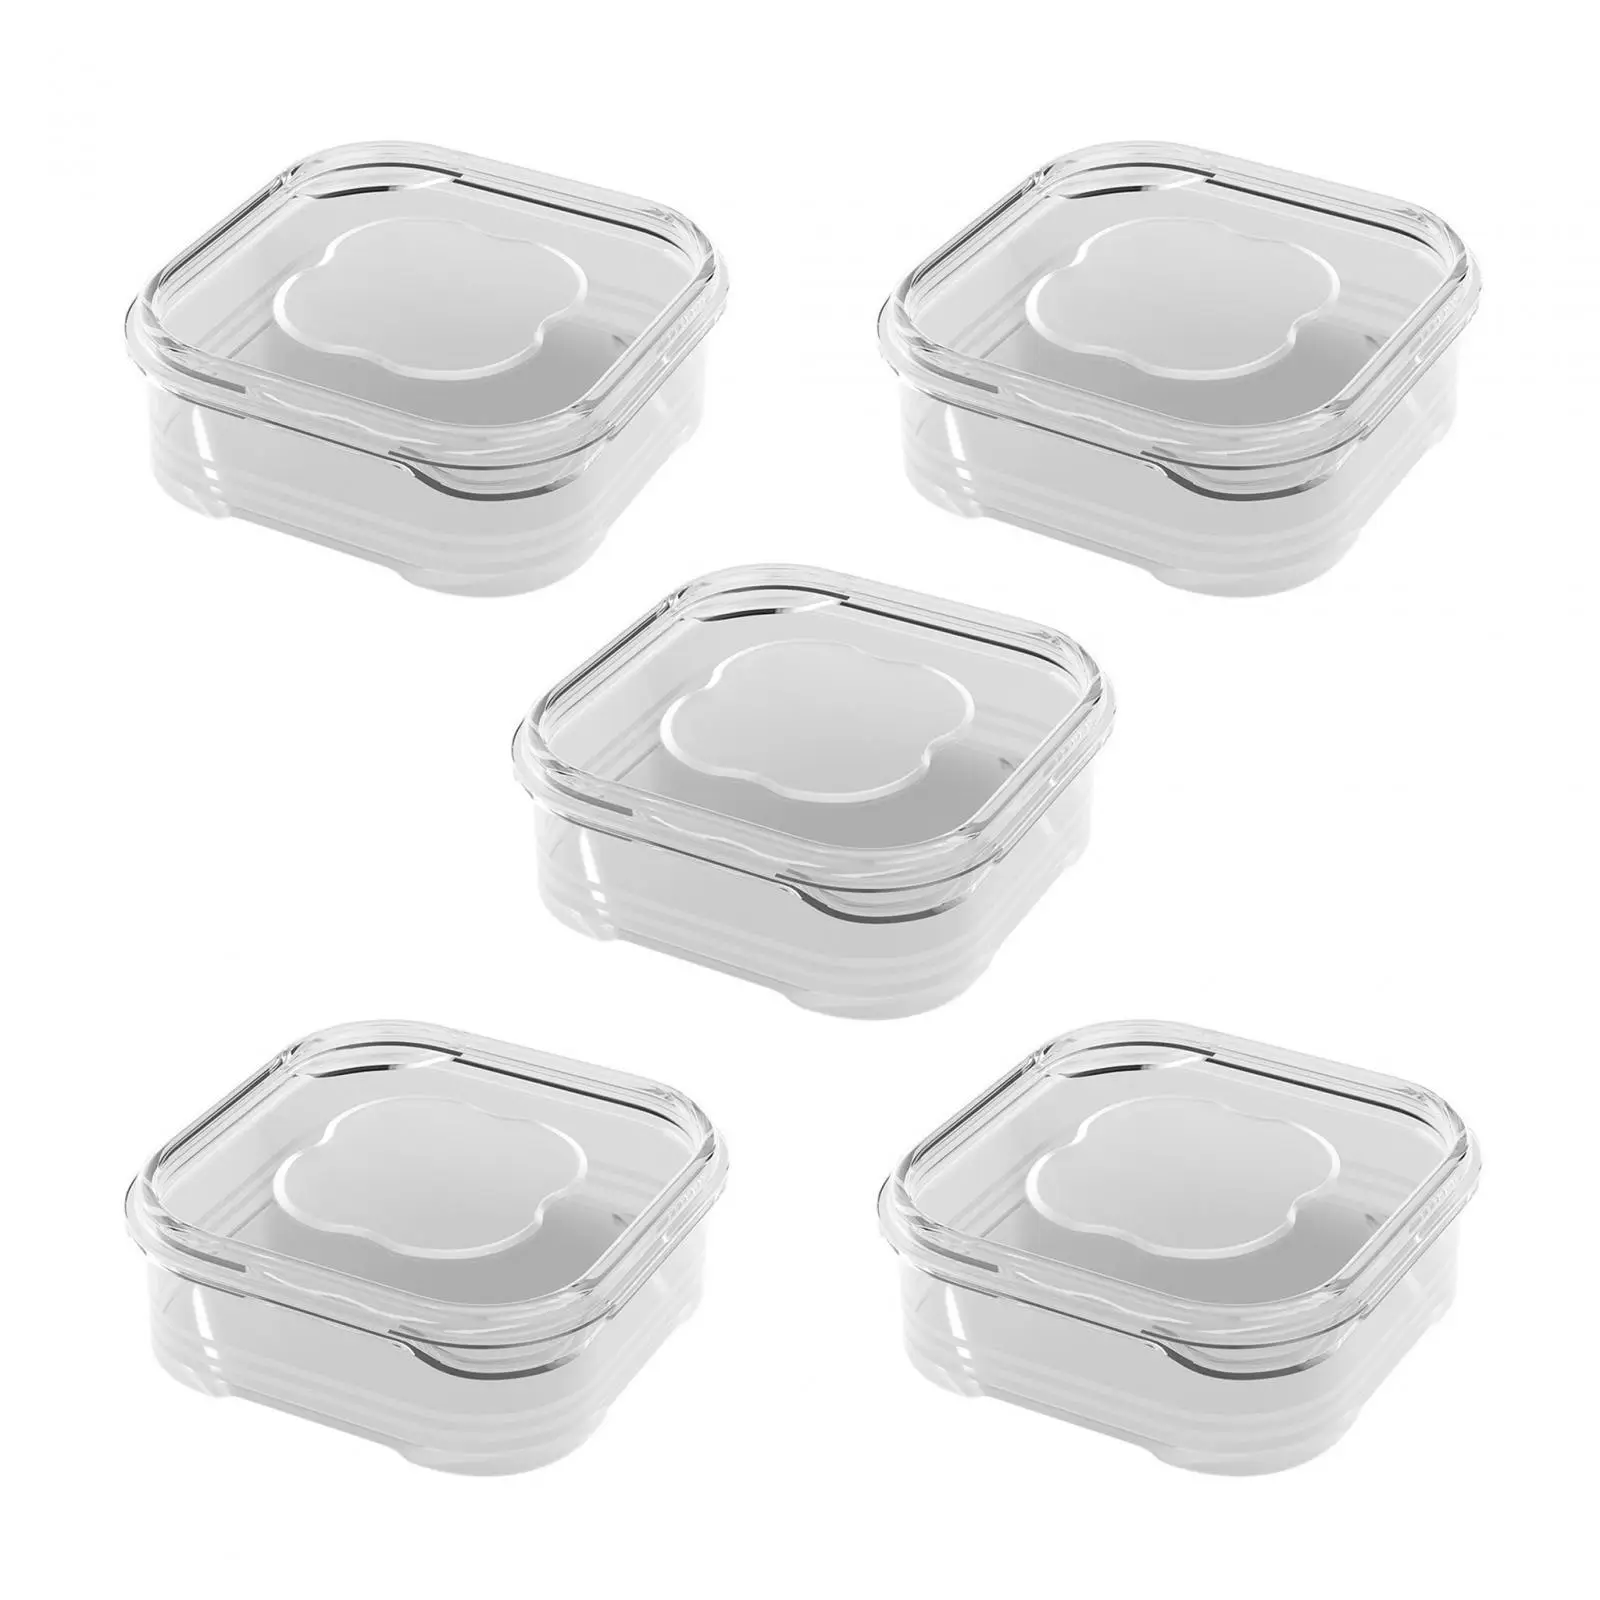 5x Container Fruit Vegetable Storage Container with Sealing Lid Stackable Food Storage Container Fridge Saver Containers 350ml